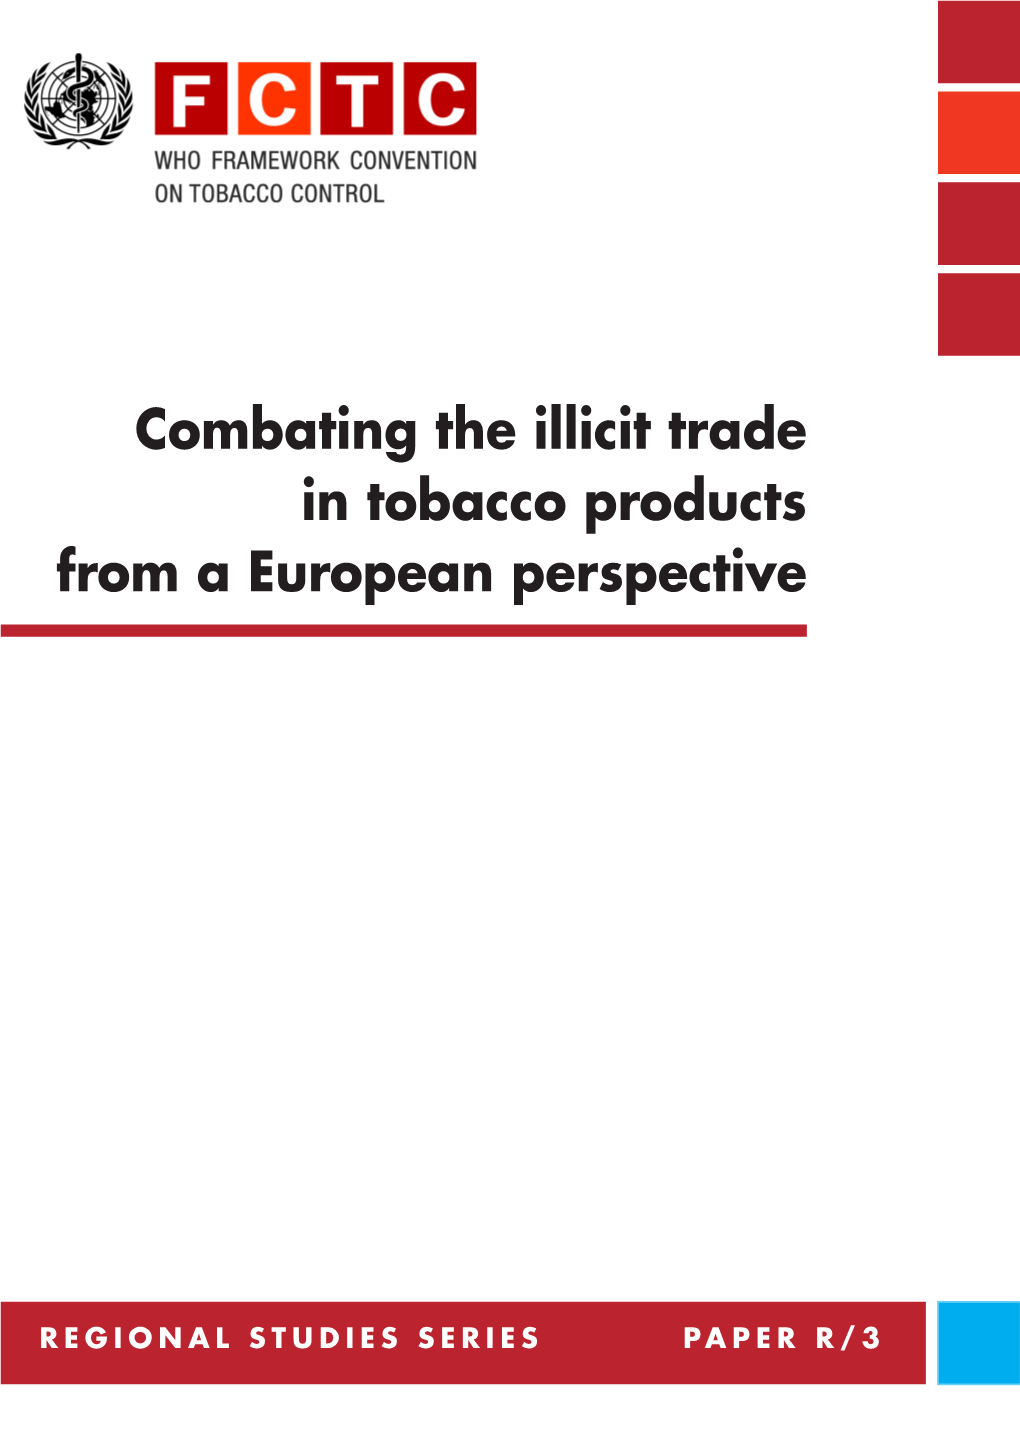 Combating the Illicit Trade in Tobacco Products from a European Perspective